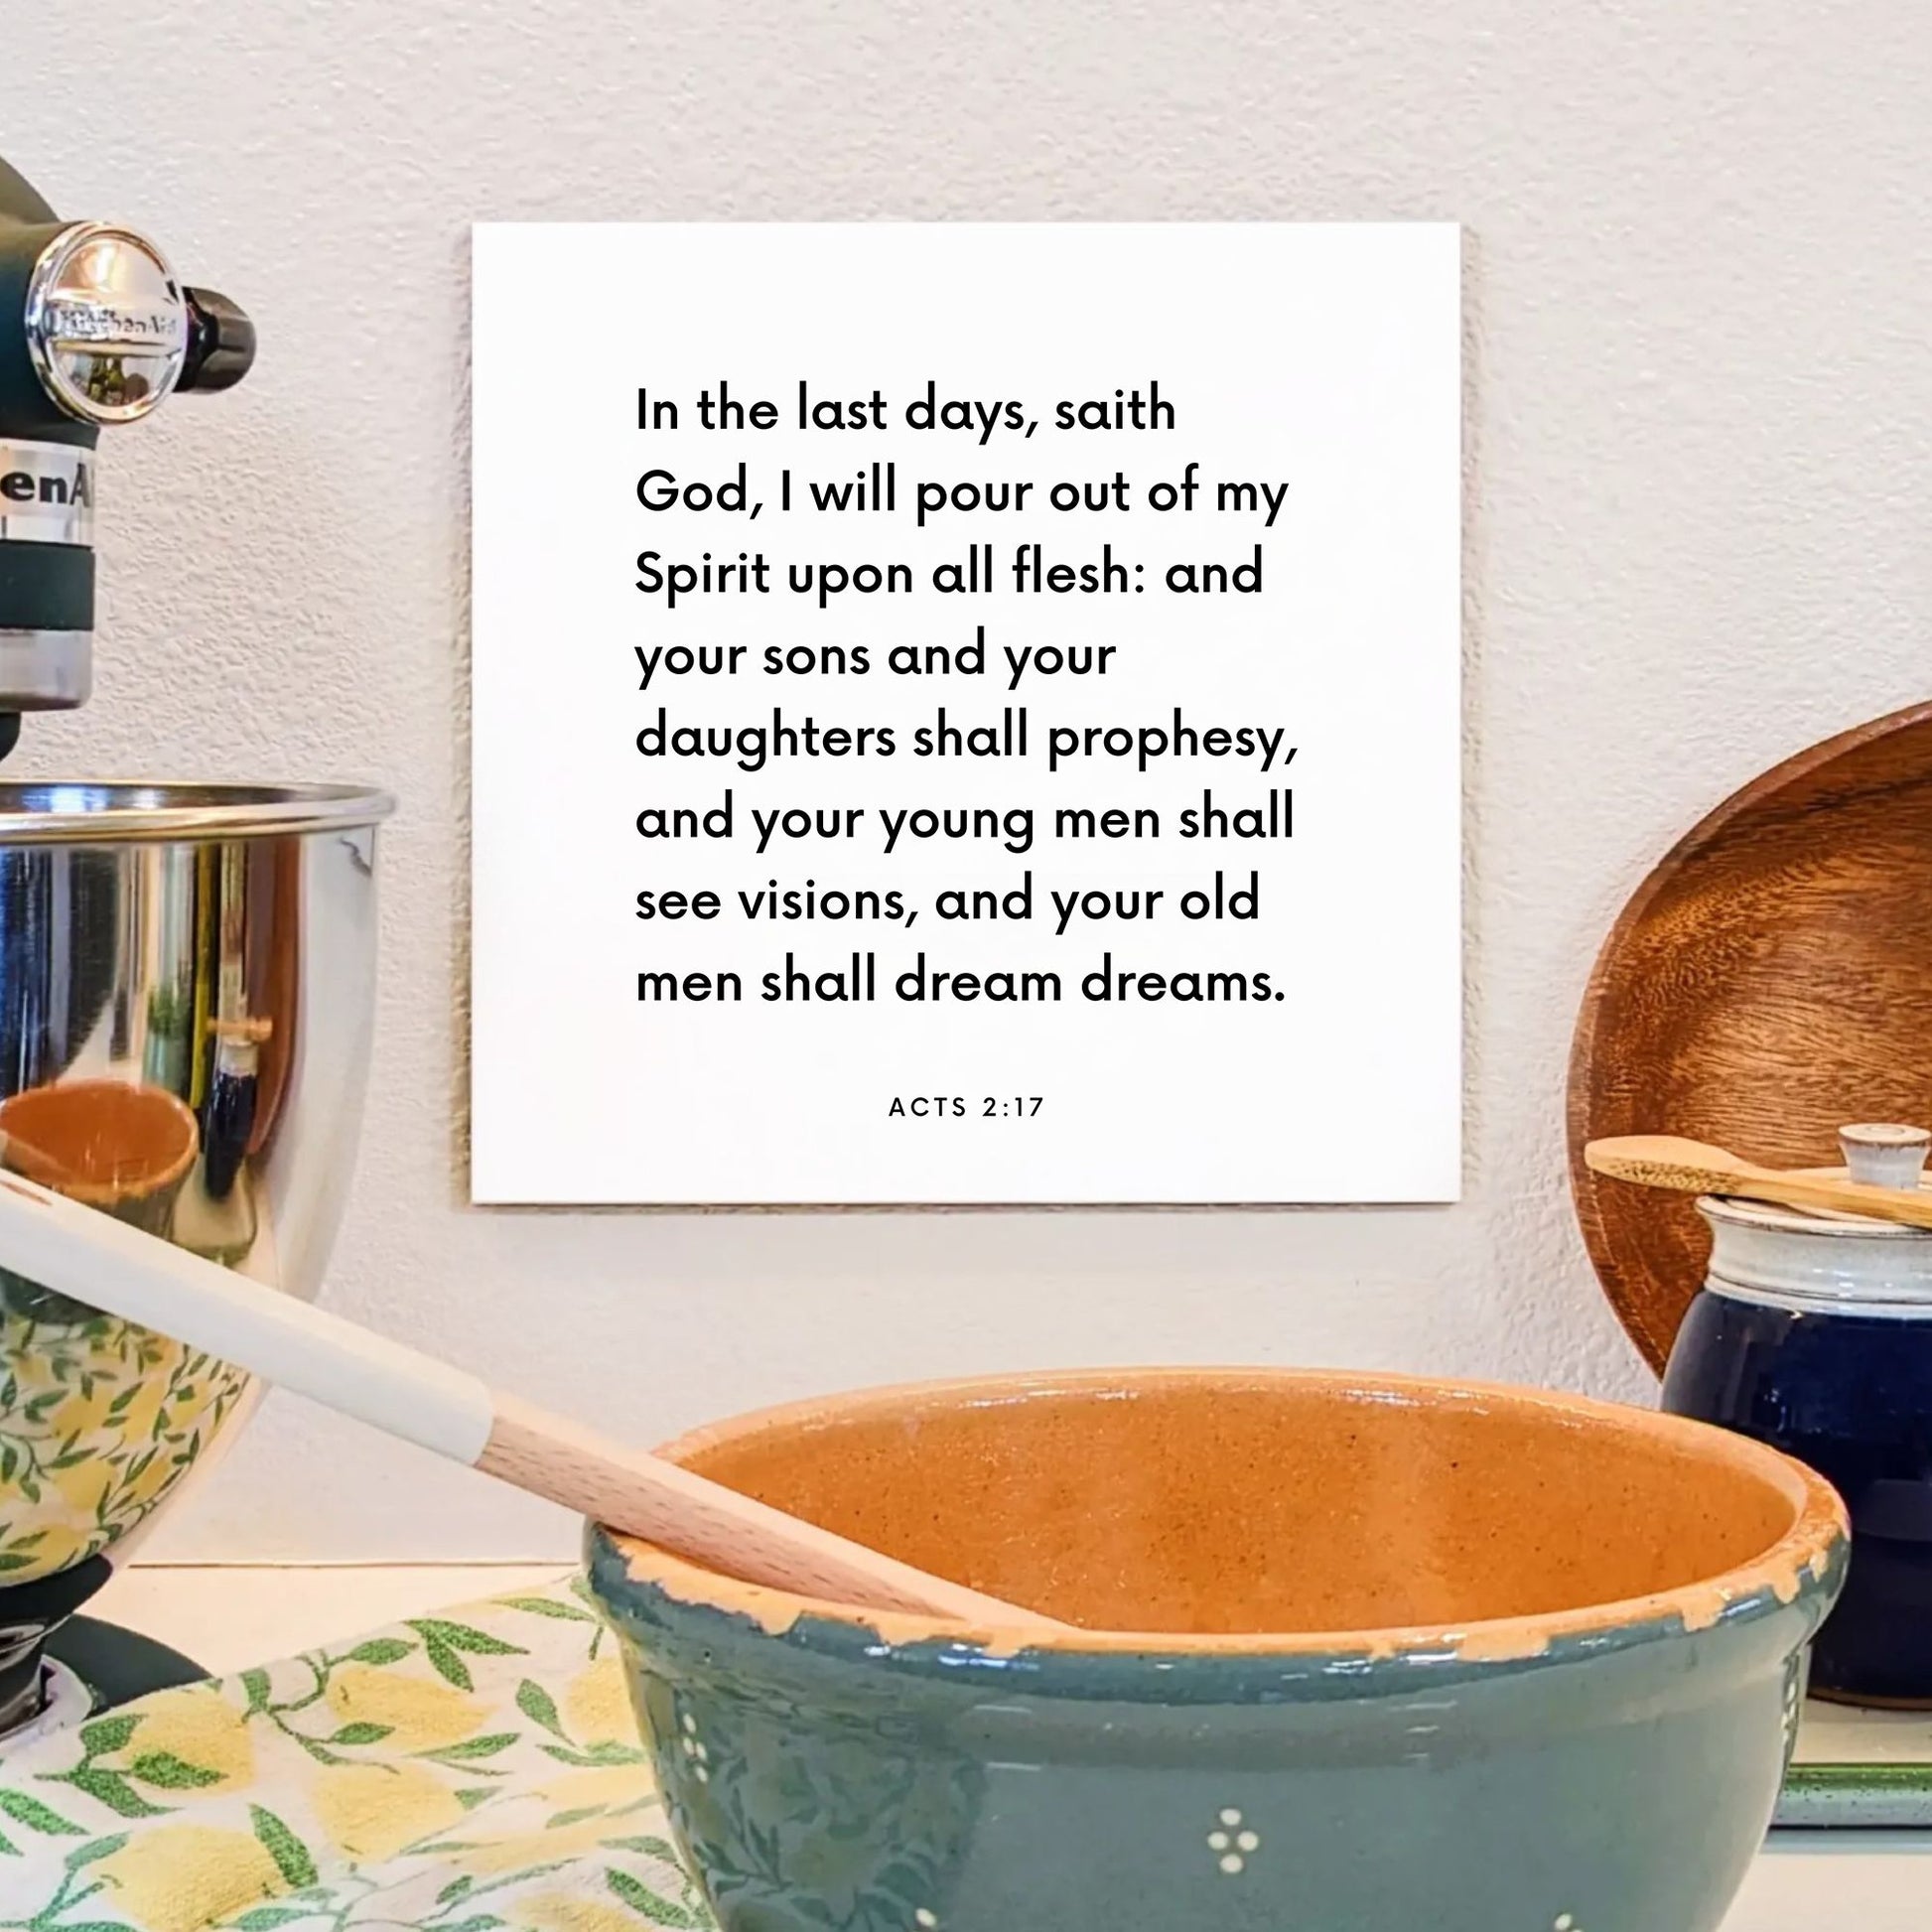 Kitchen mouting of the scripture tile for Acts 2:17 - "In the last days, I will pour out my spirit upon all flesh"